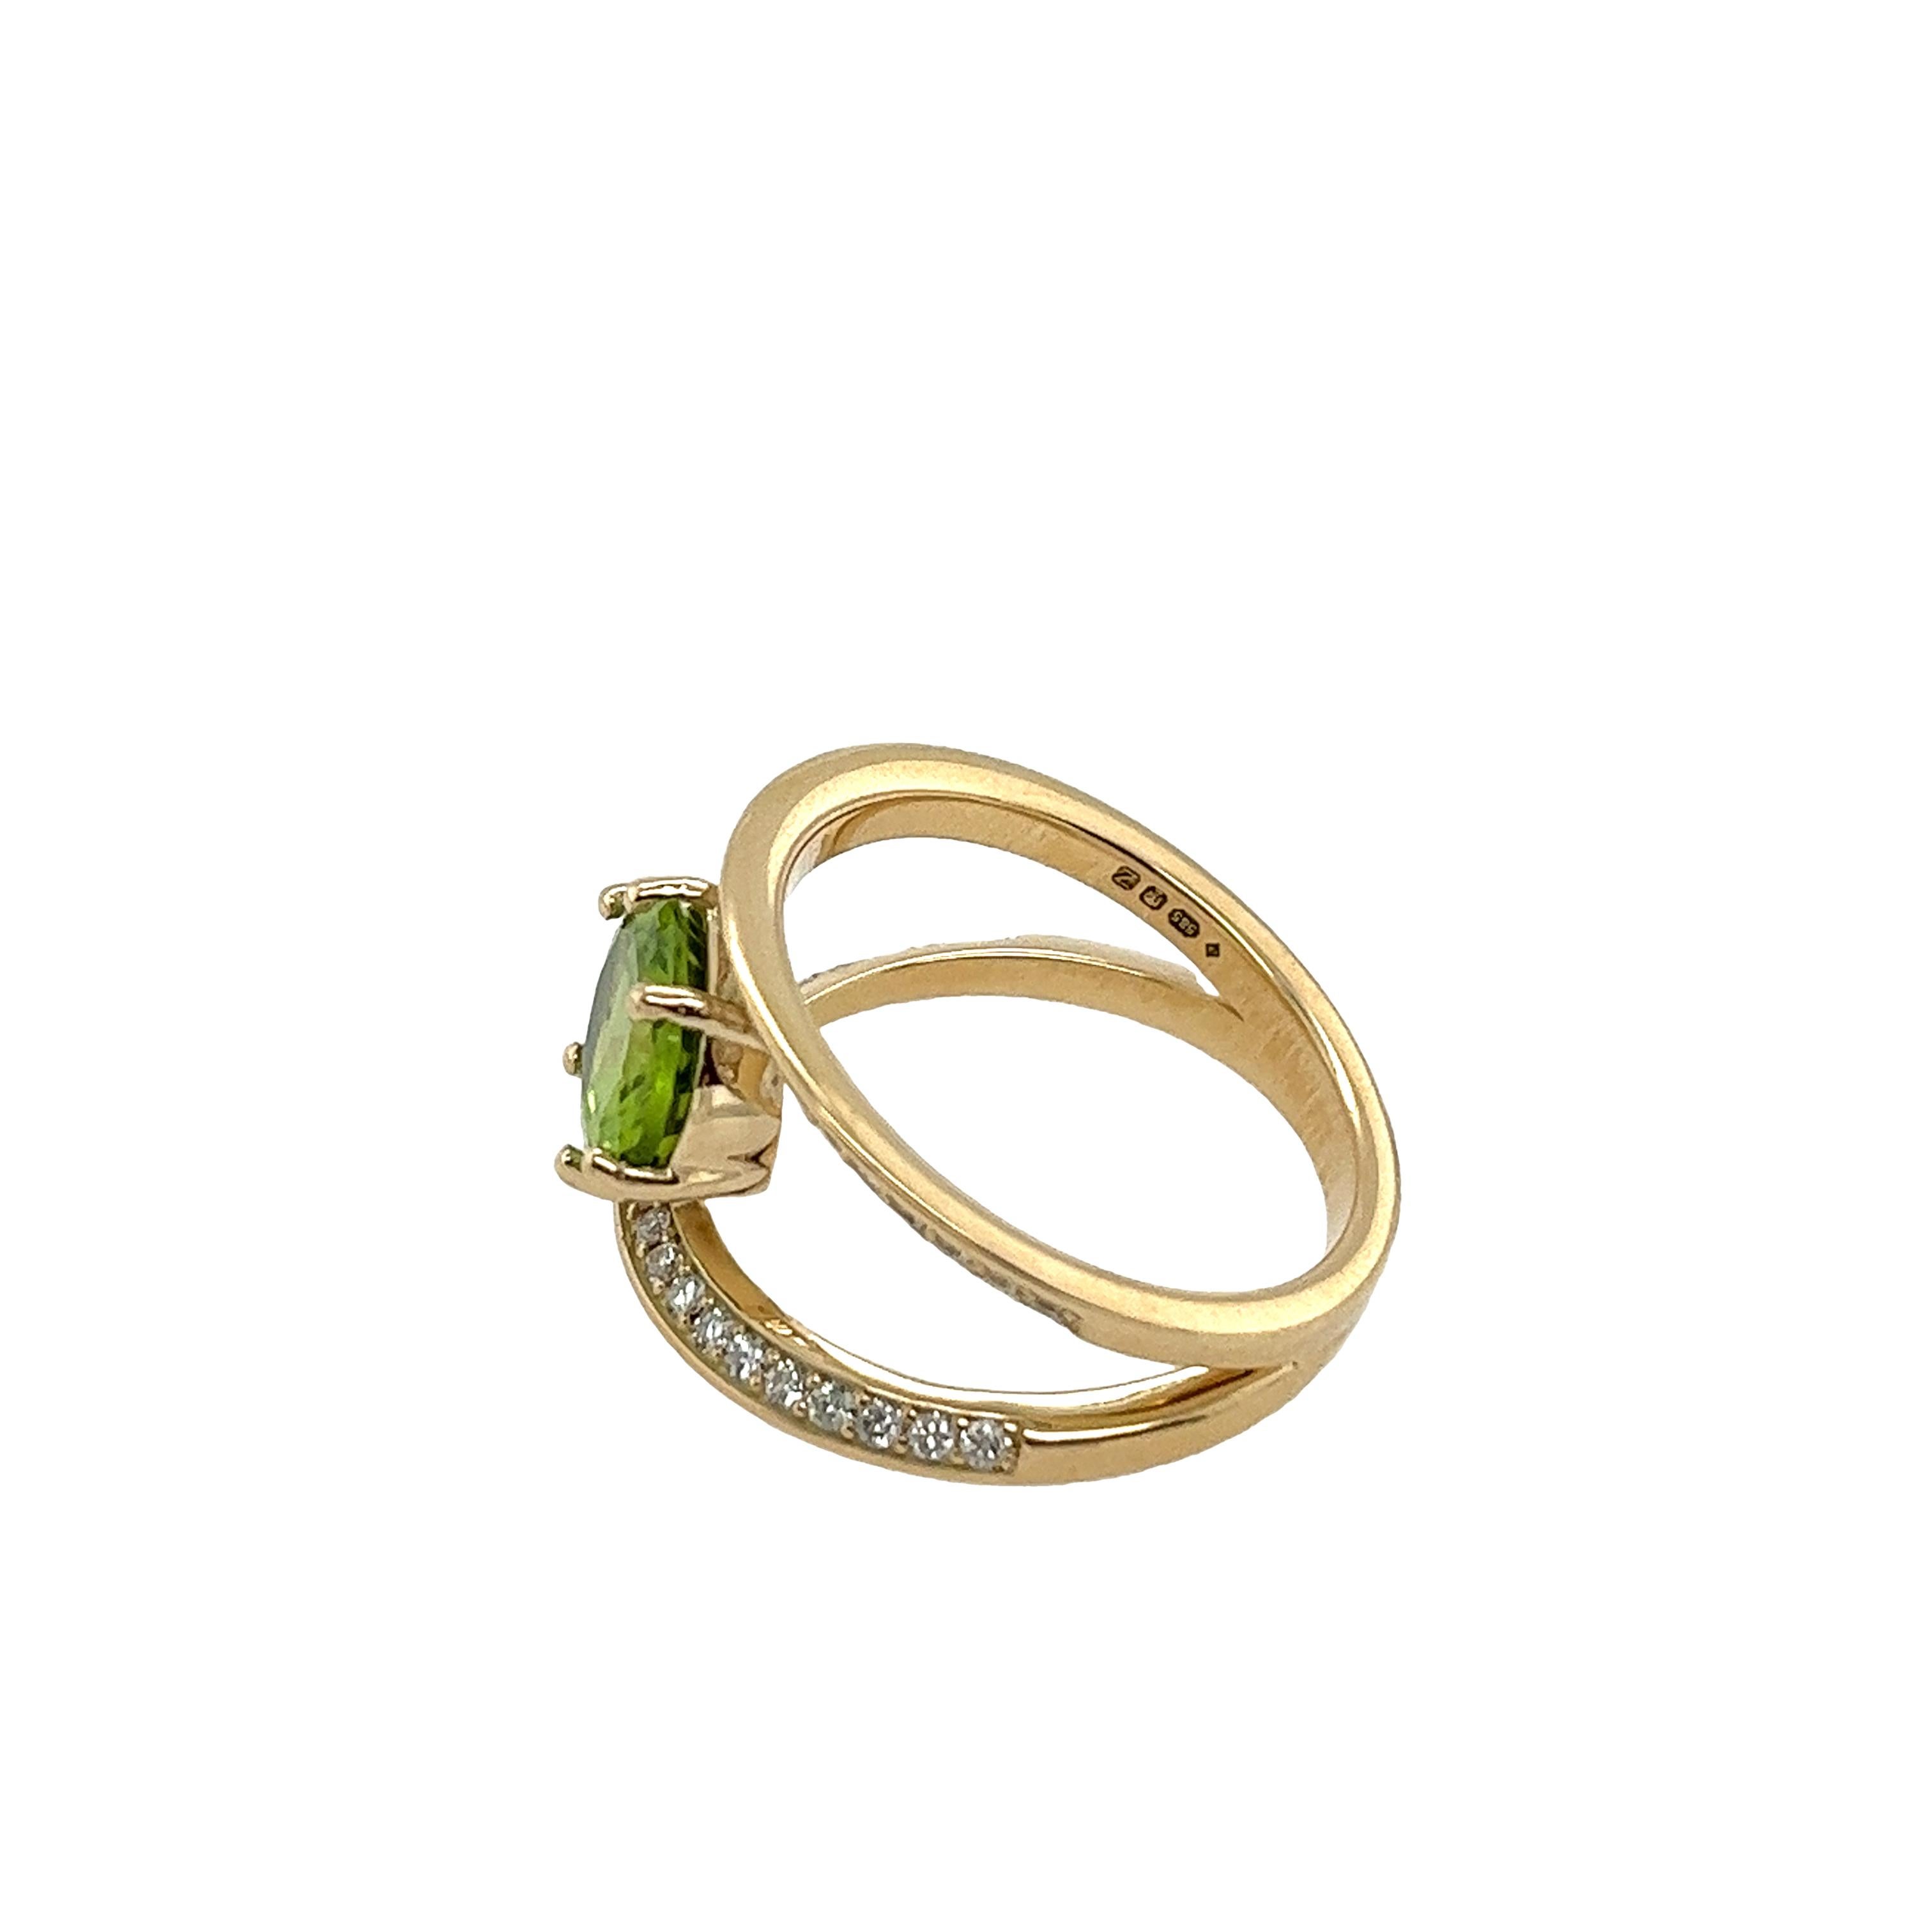 Round Cut 14ct Yellow Gold Diamond & Peridot Ring With 0.30ct small Diamonds Shoulders For Sale